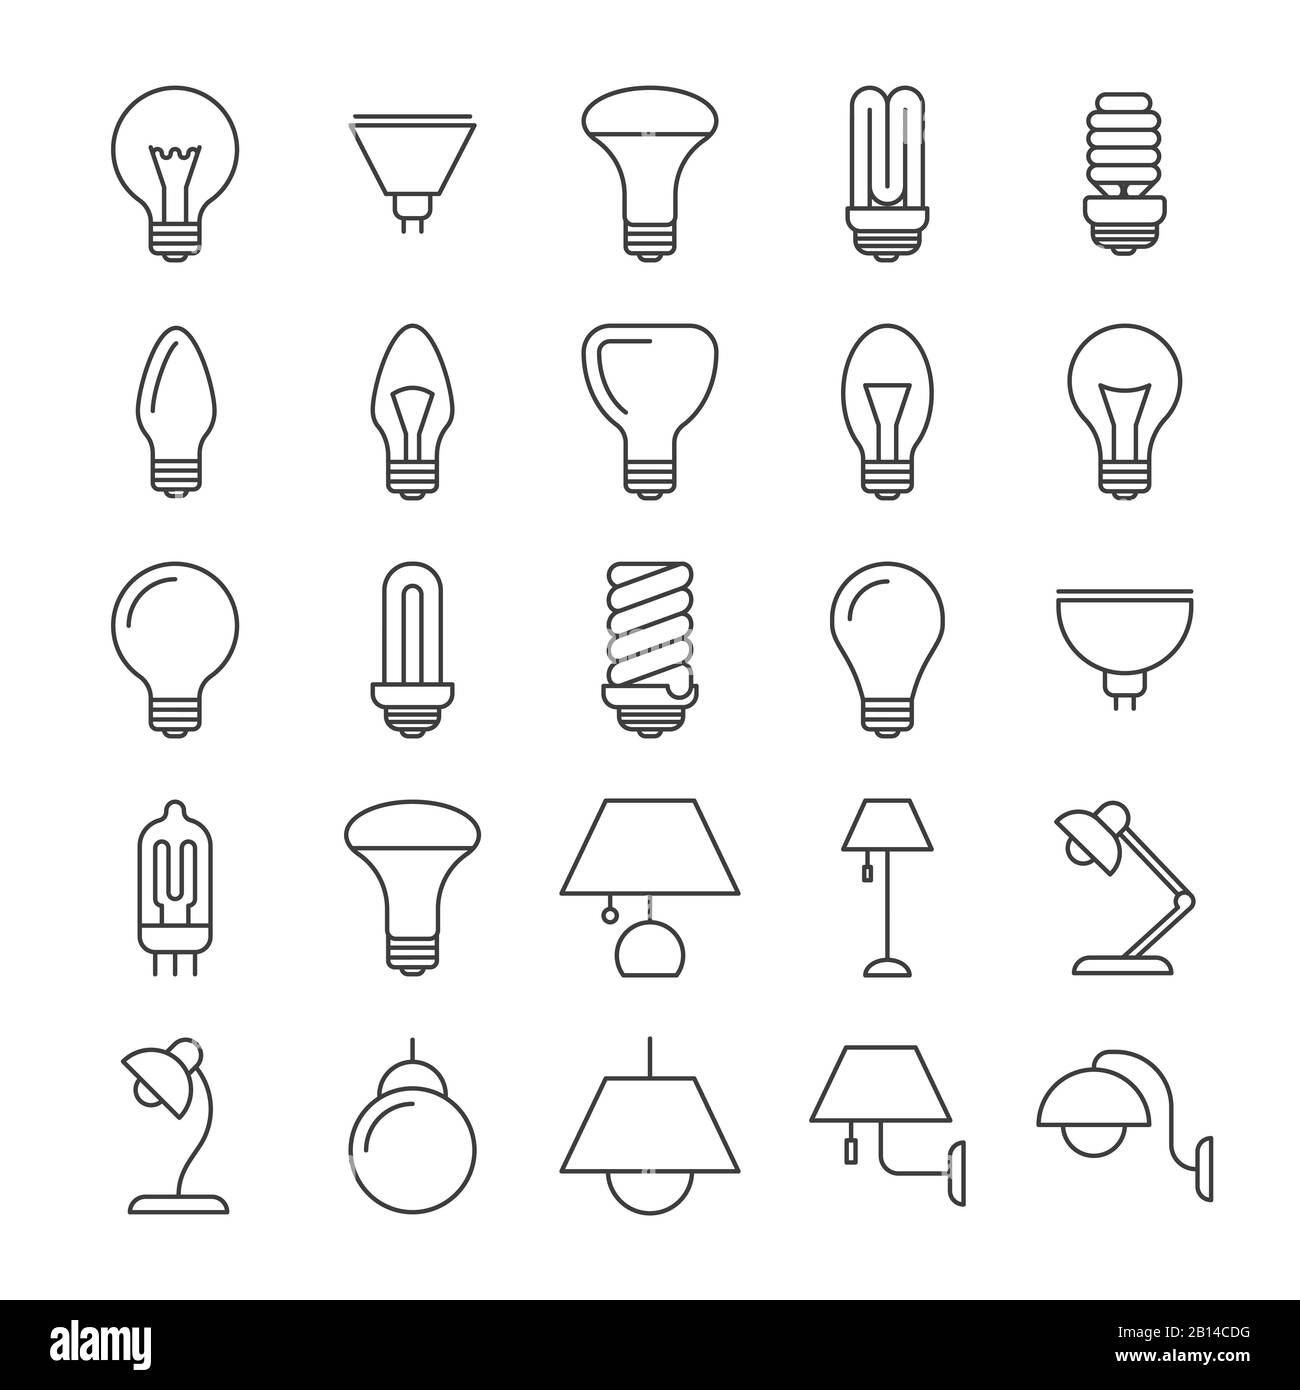 Lamp and light bulbs line icons collection. Light lamp variation, table and wall illustration vector Stock Vector